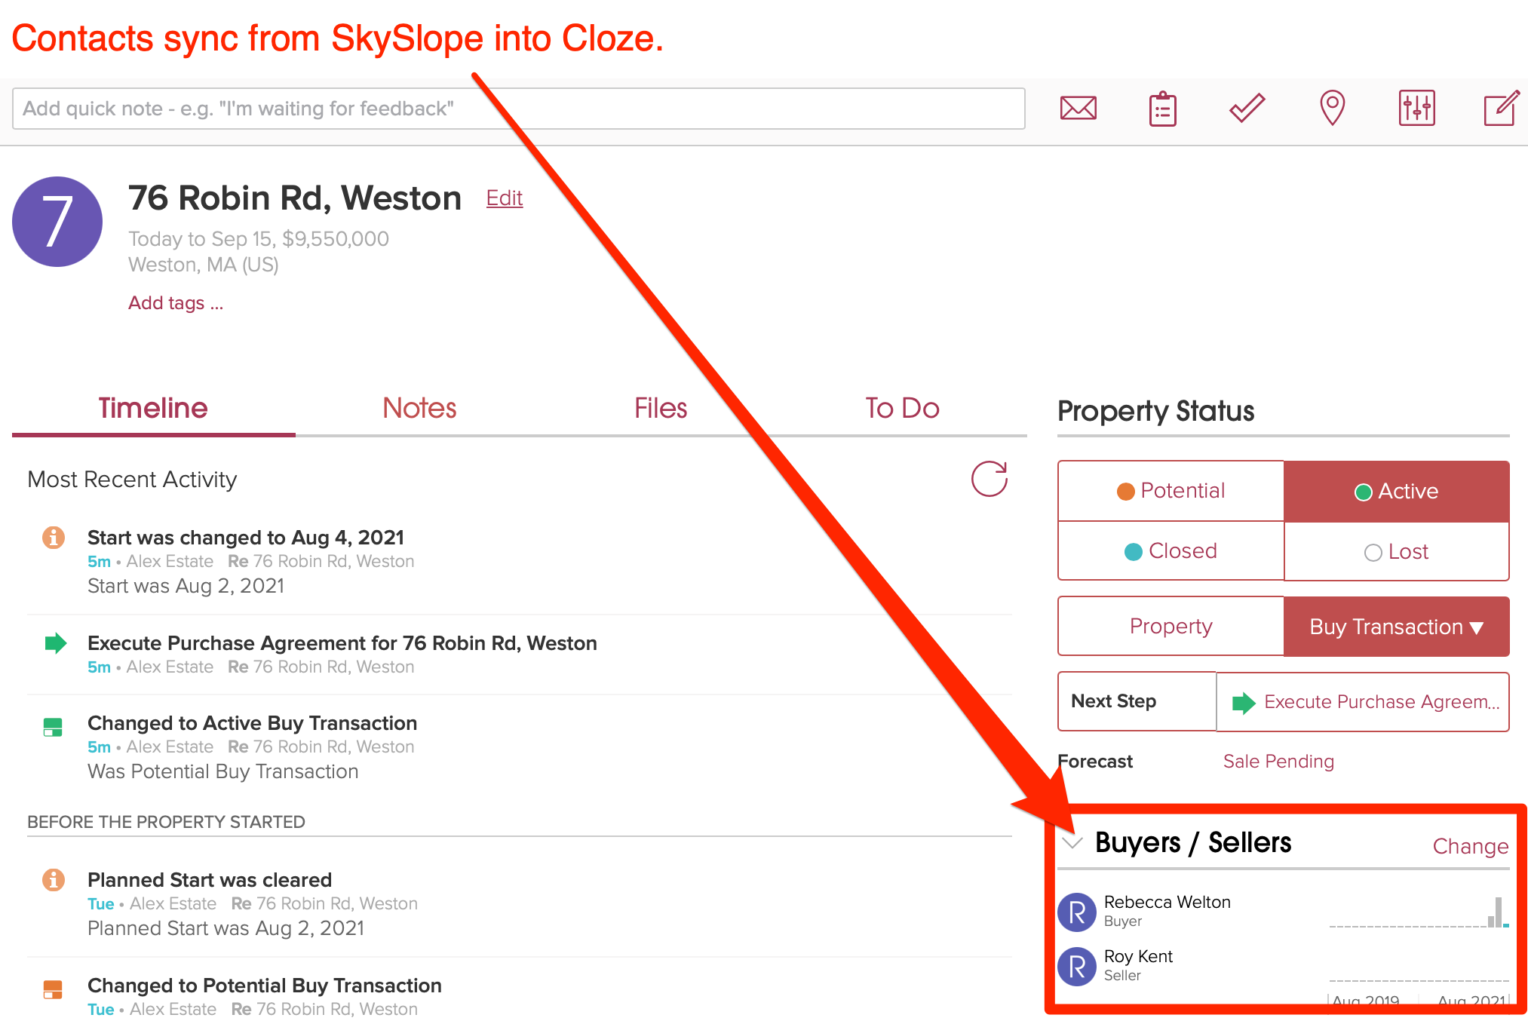 SkySlope contacts -- like buyers and sellers - sync to Cloze.